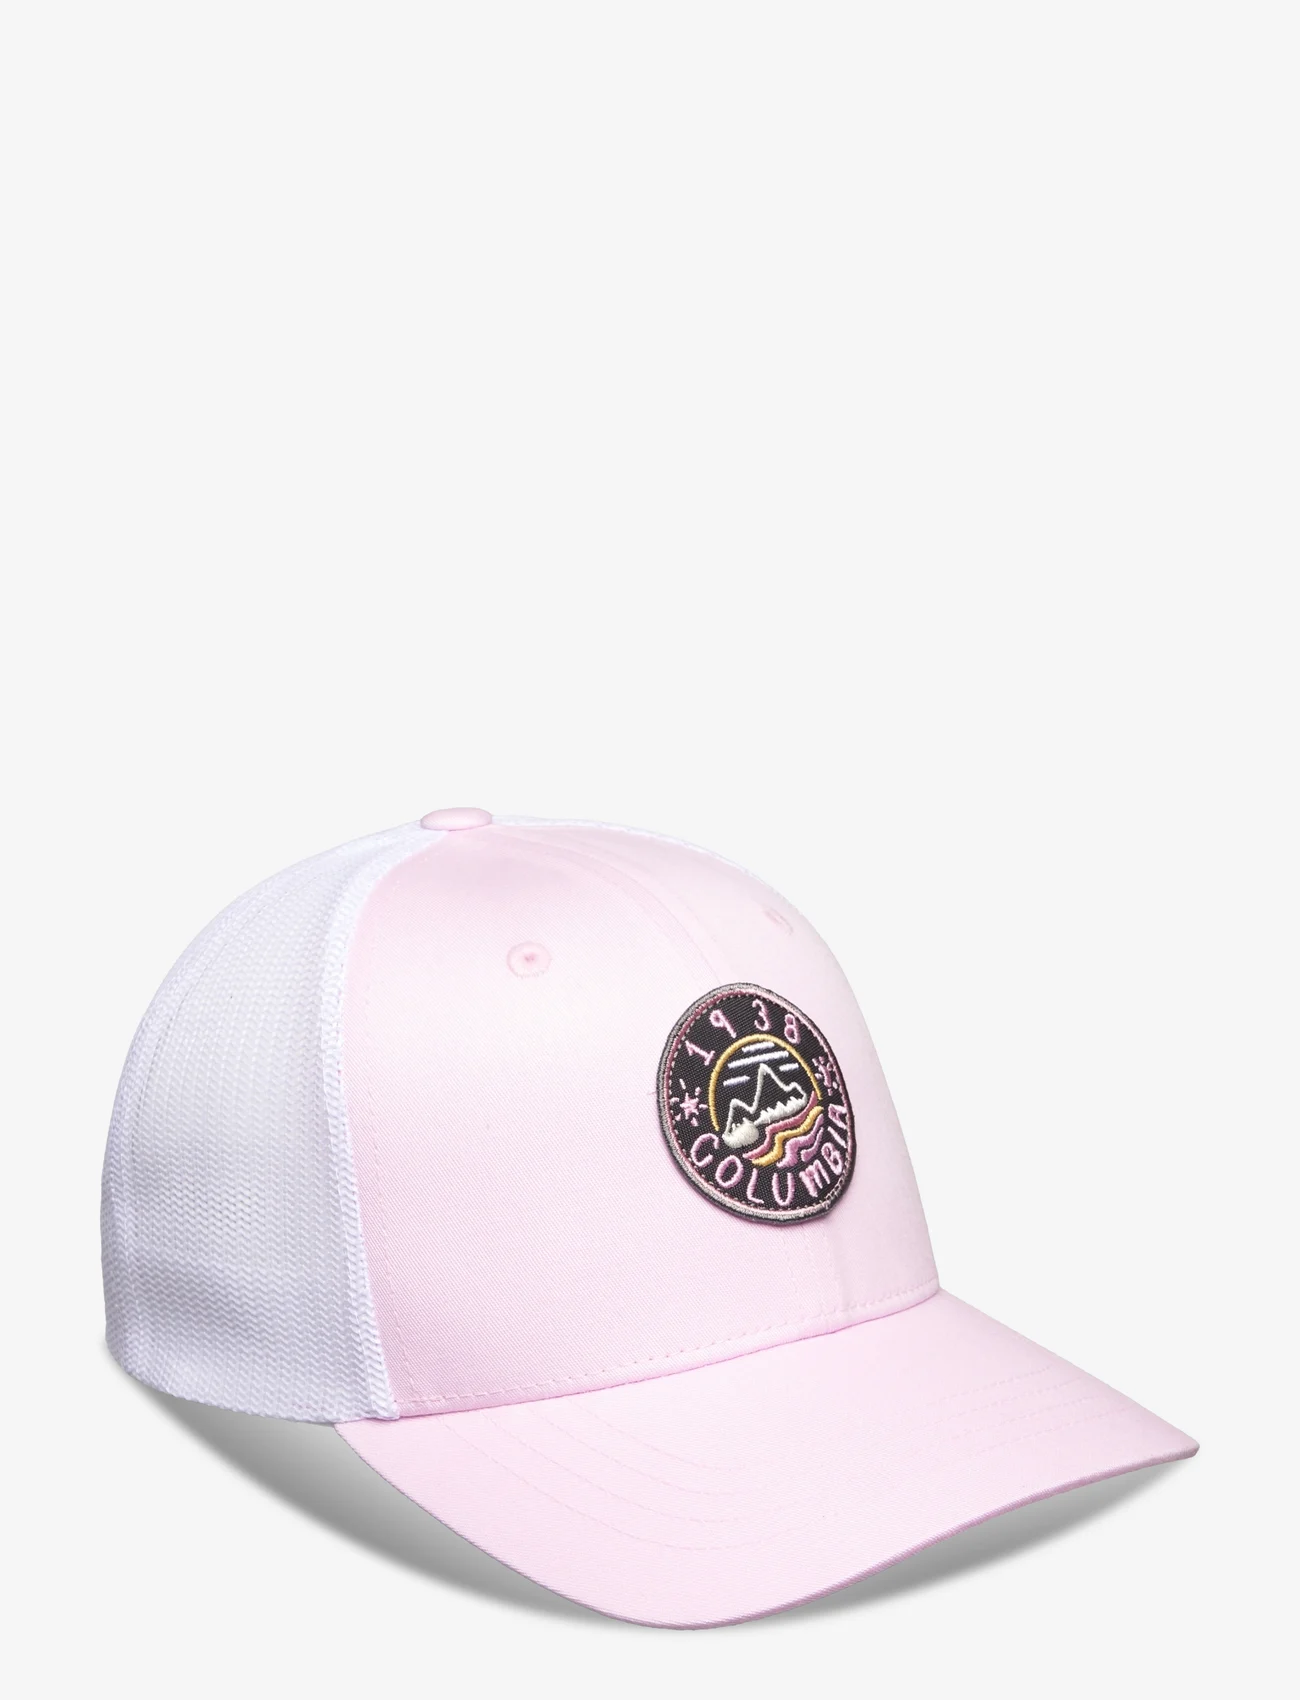 Columbia Sportswear - Columbia Youth Snap Back - sommerkupp - pink dawn, white, hot marker waves - 0